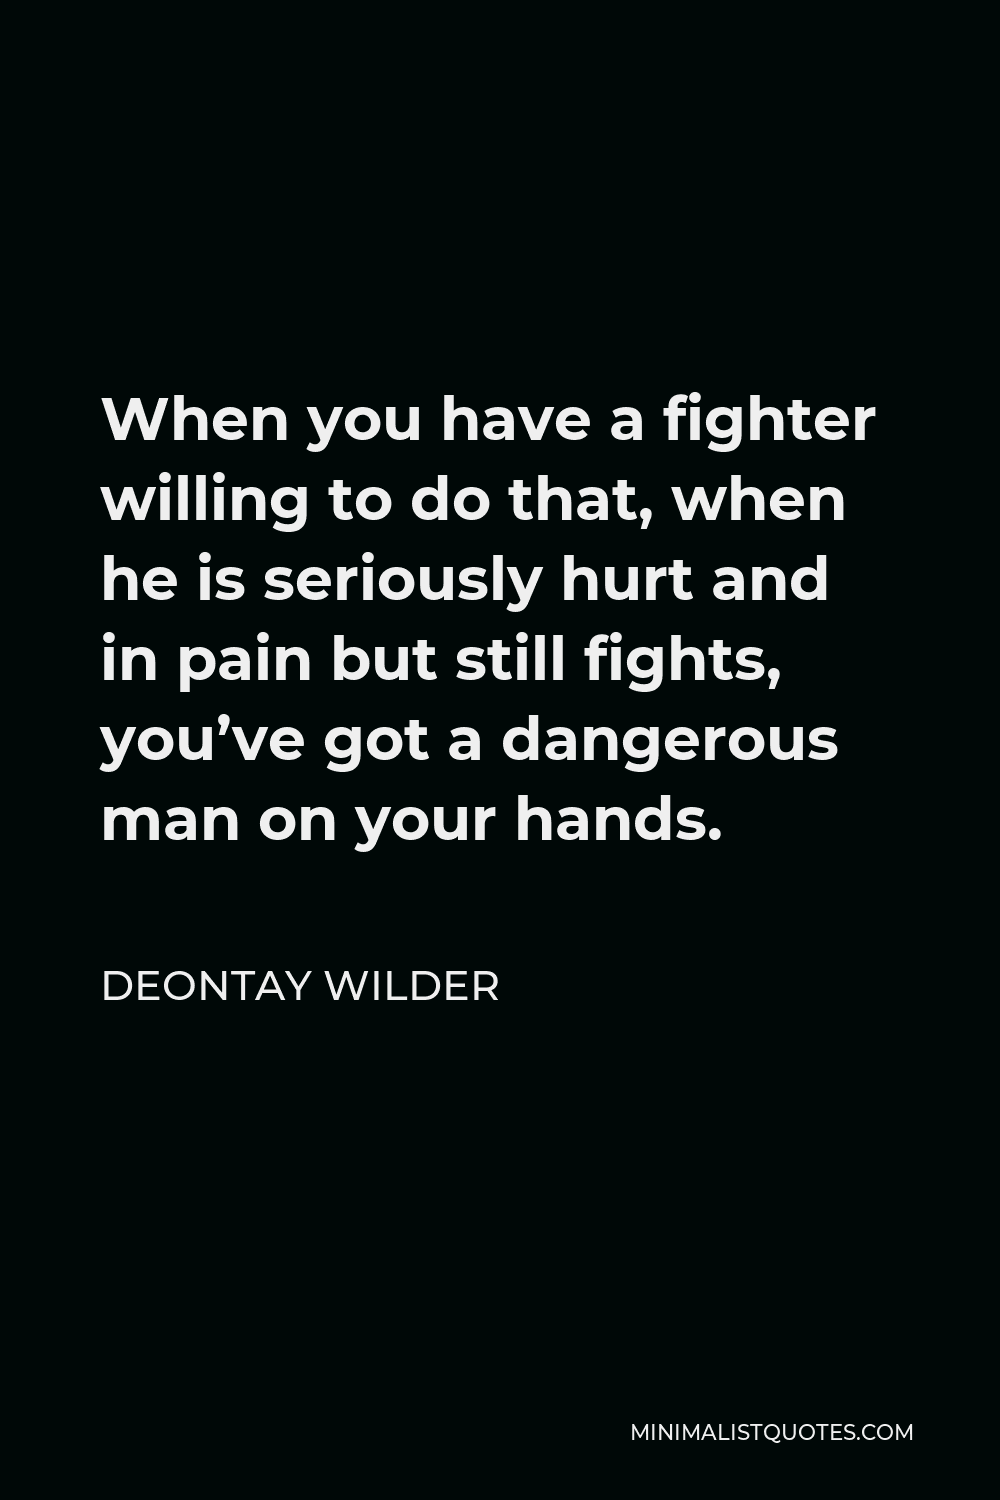 Deontay Wilder Quote - When you have a fighter willing to do that, when he is seriously hurt and in pain but still fights, you’ve got a dangerous man on your hands.